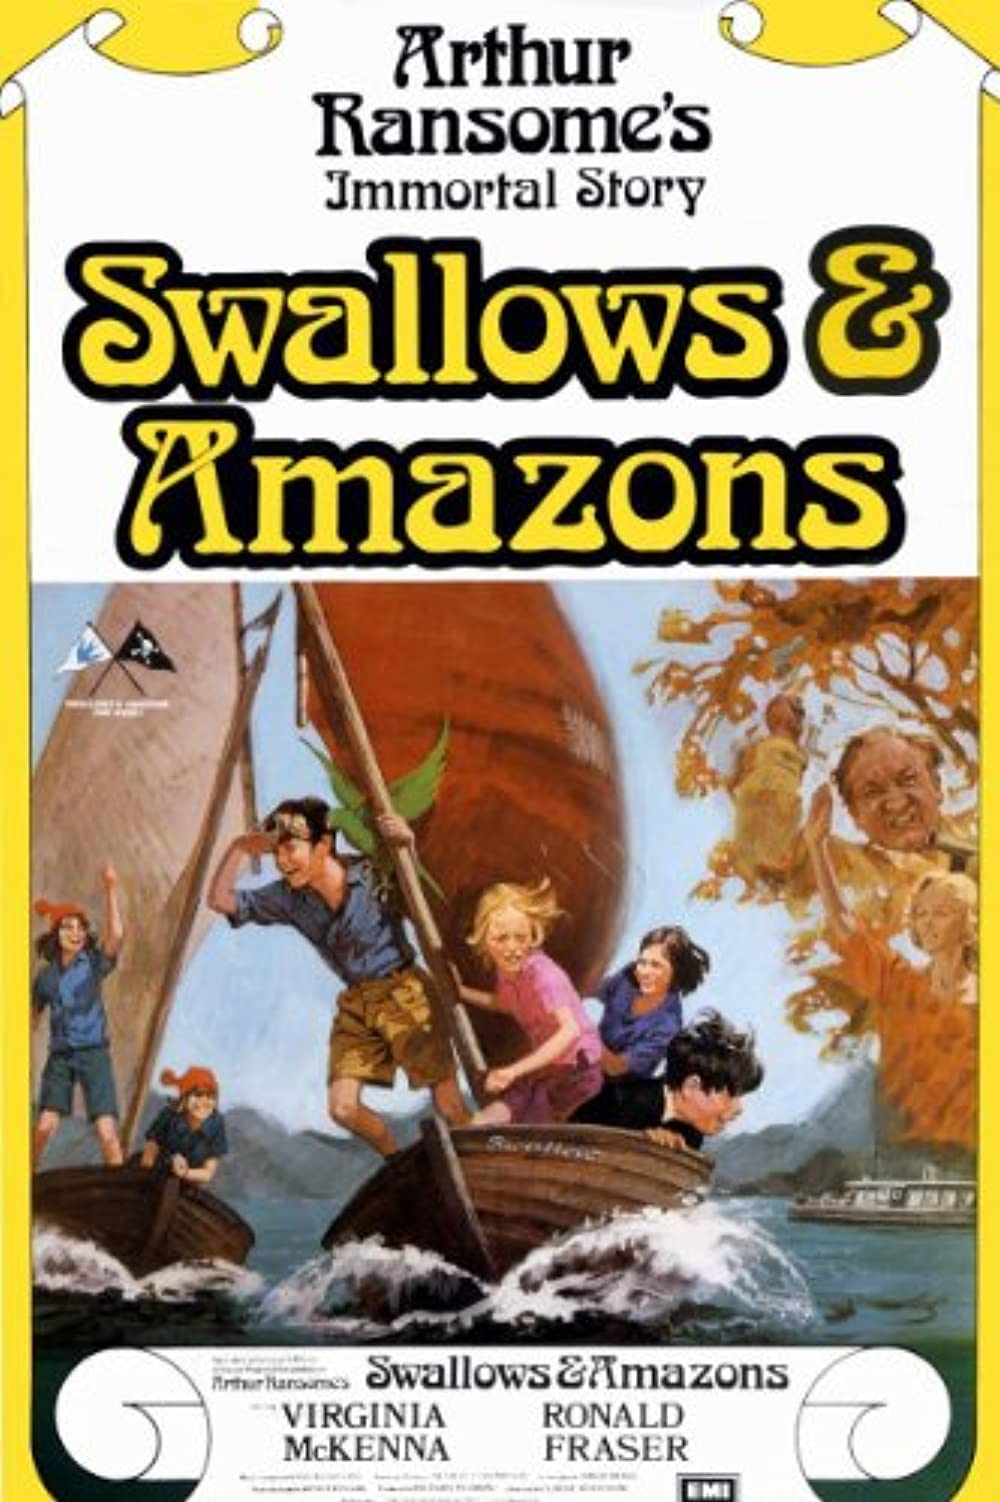 swallows and amazons (1974)